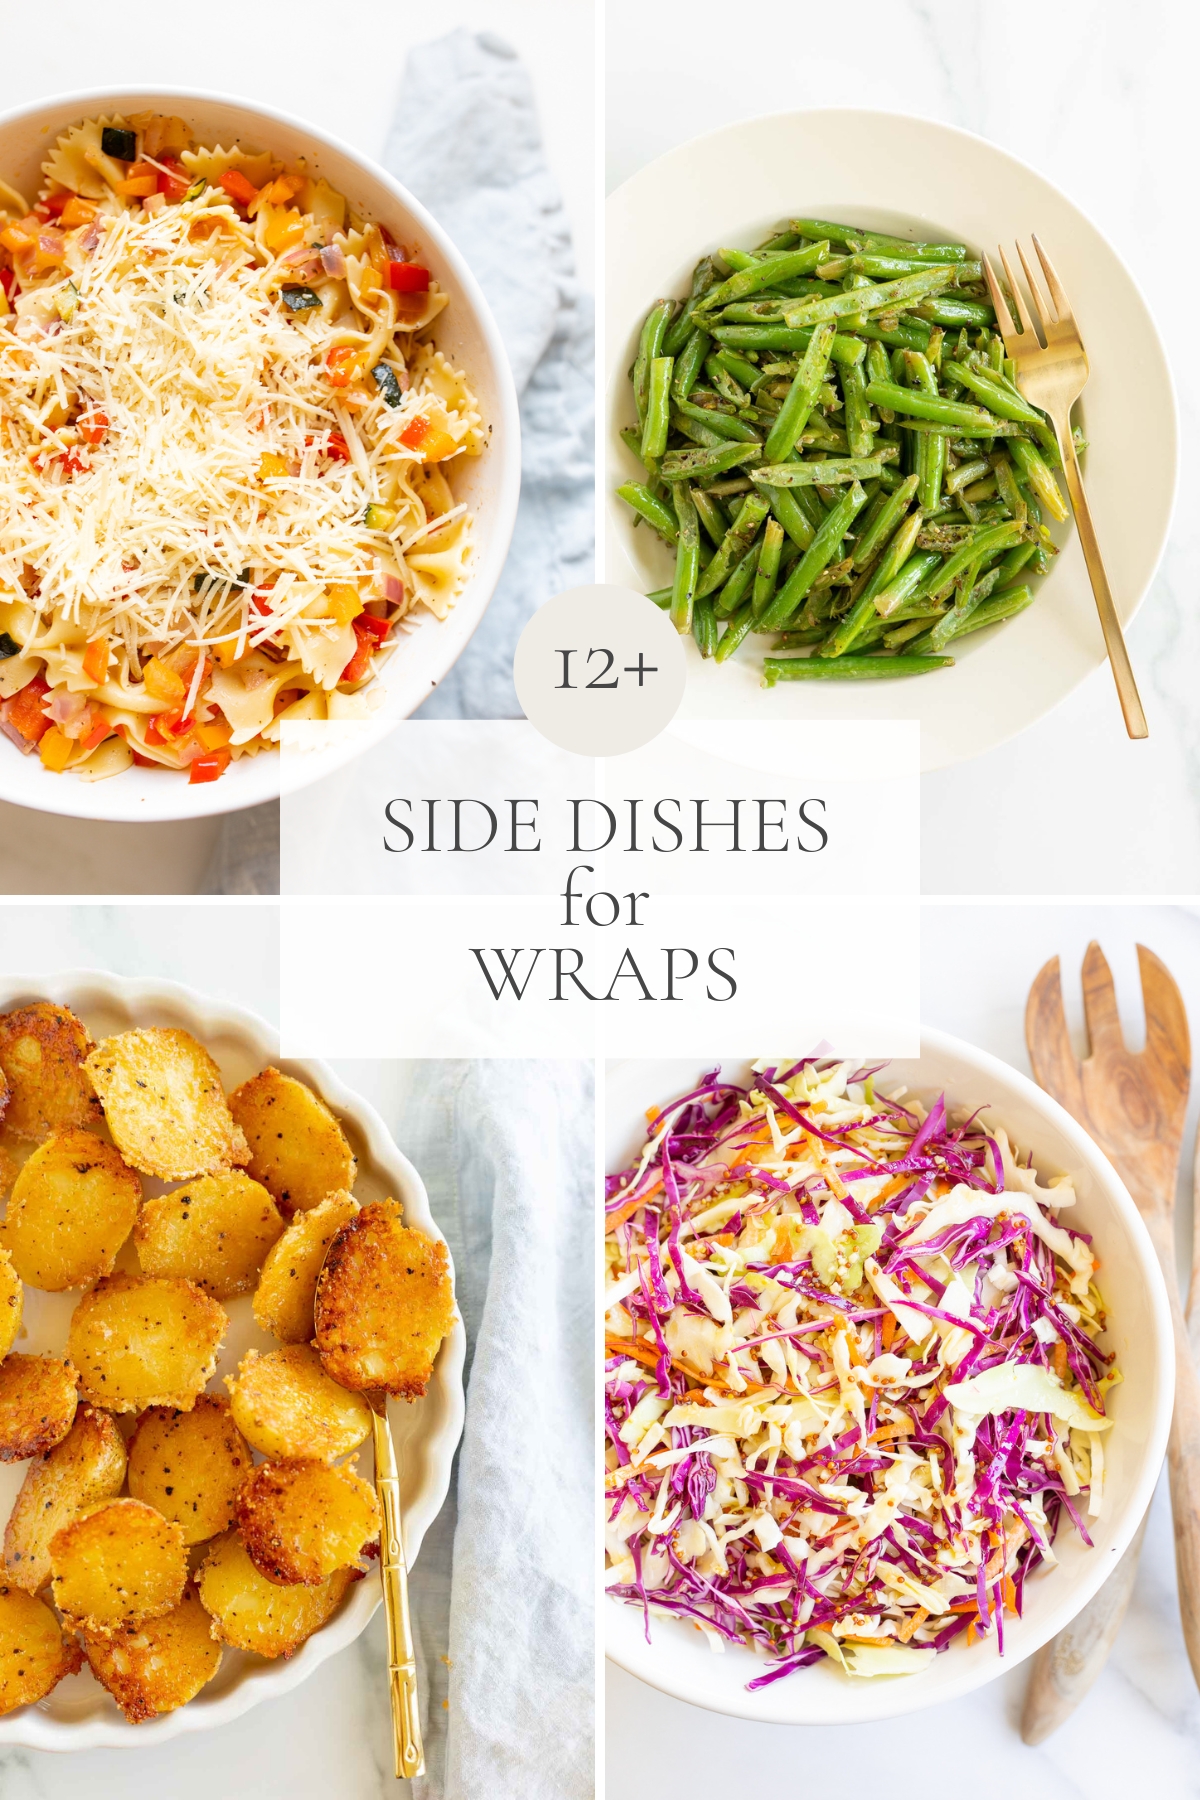 A graphic image featuring a variety of side dishes. Centered title reads "12+ Side Dishes for Wraps".